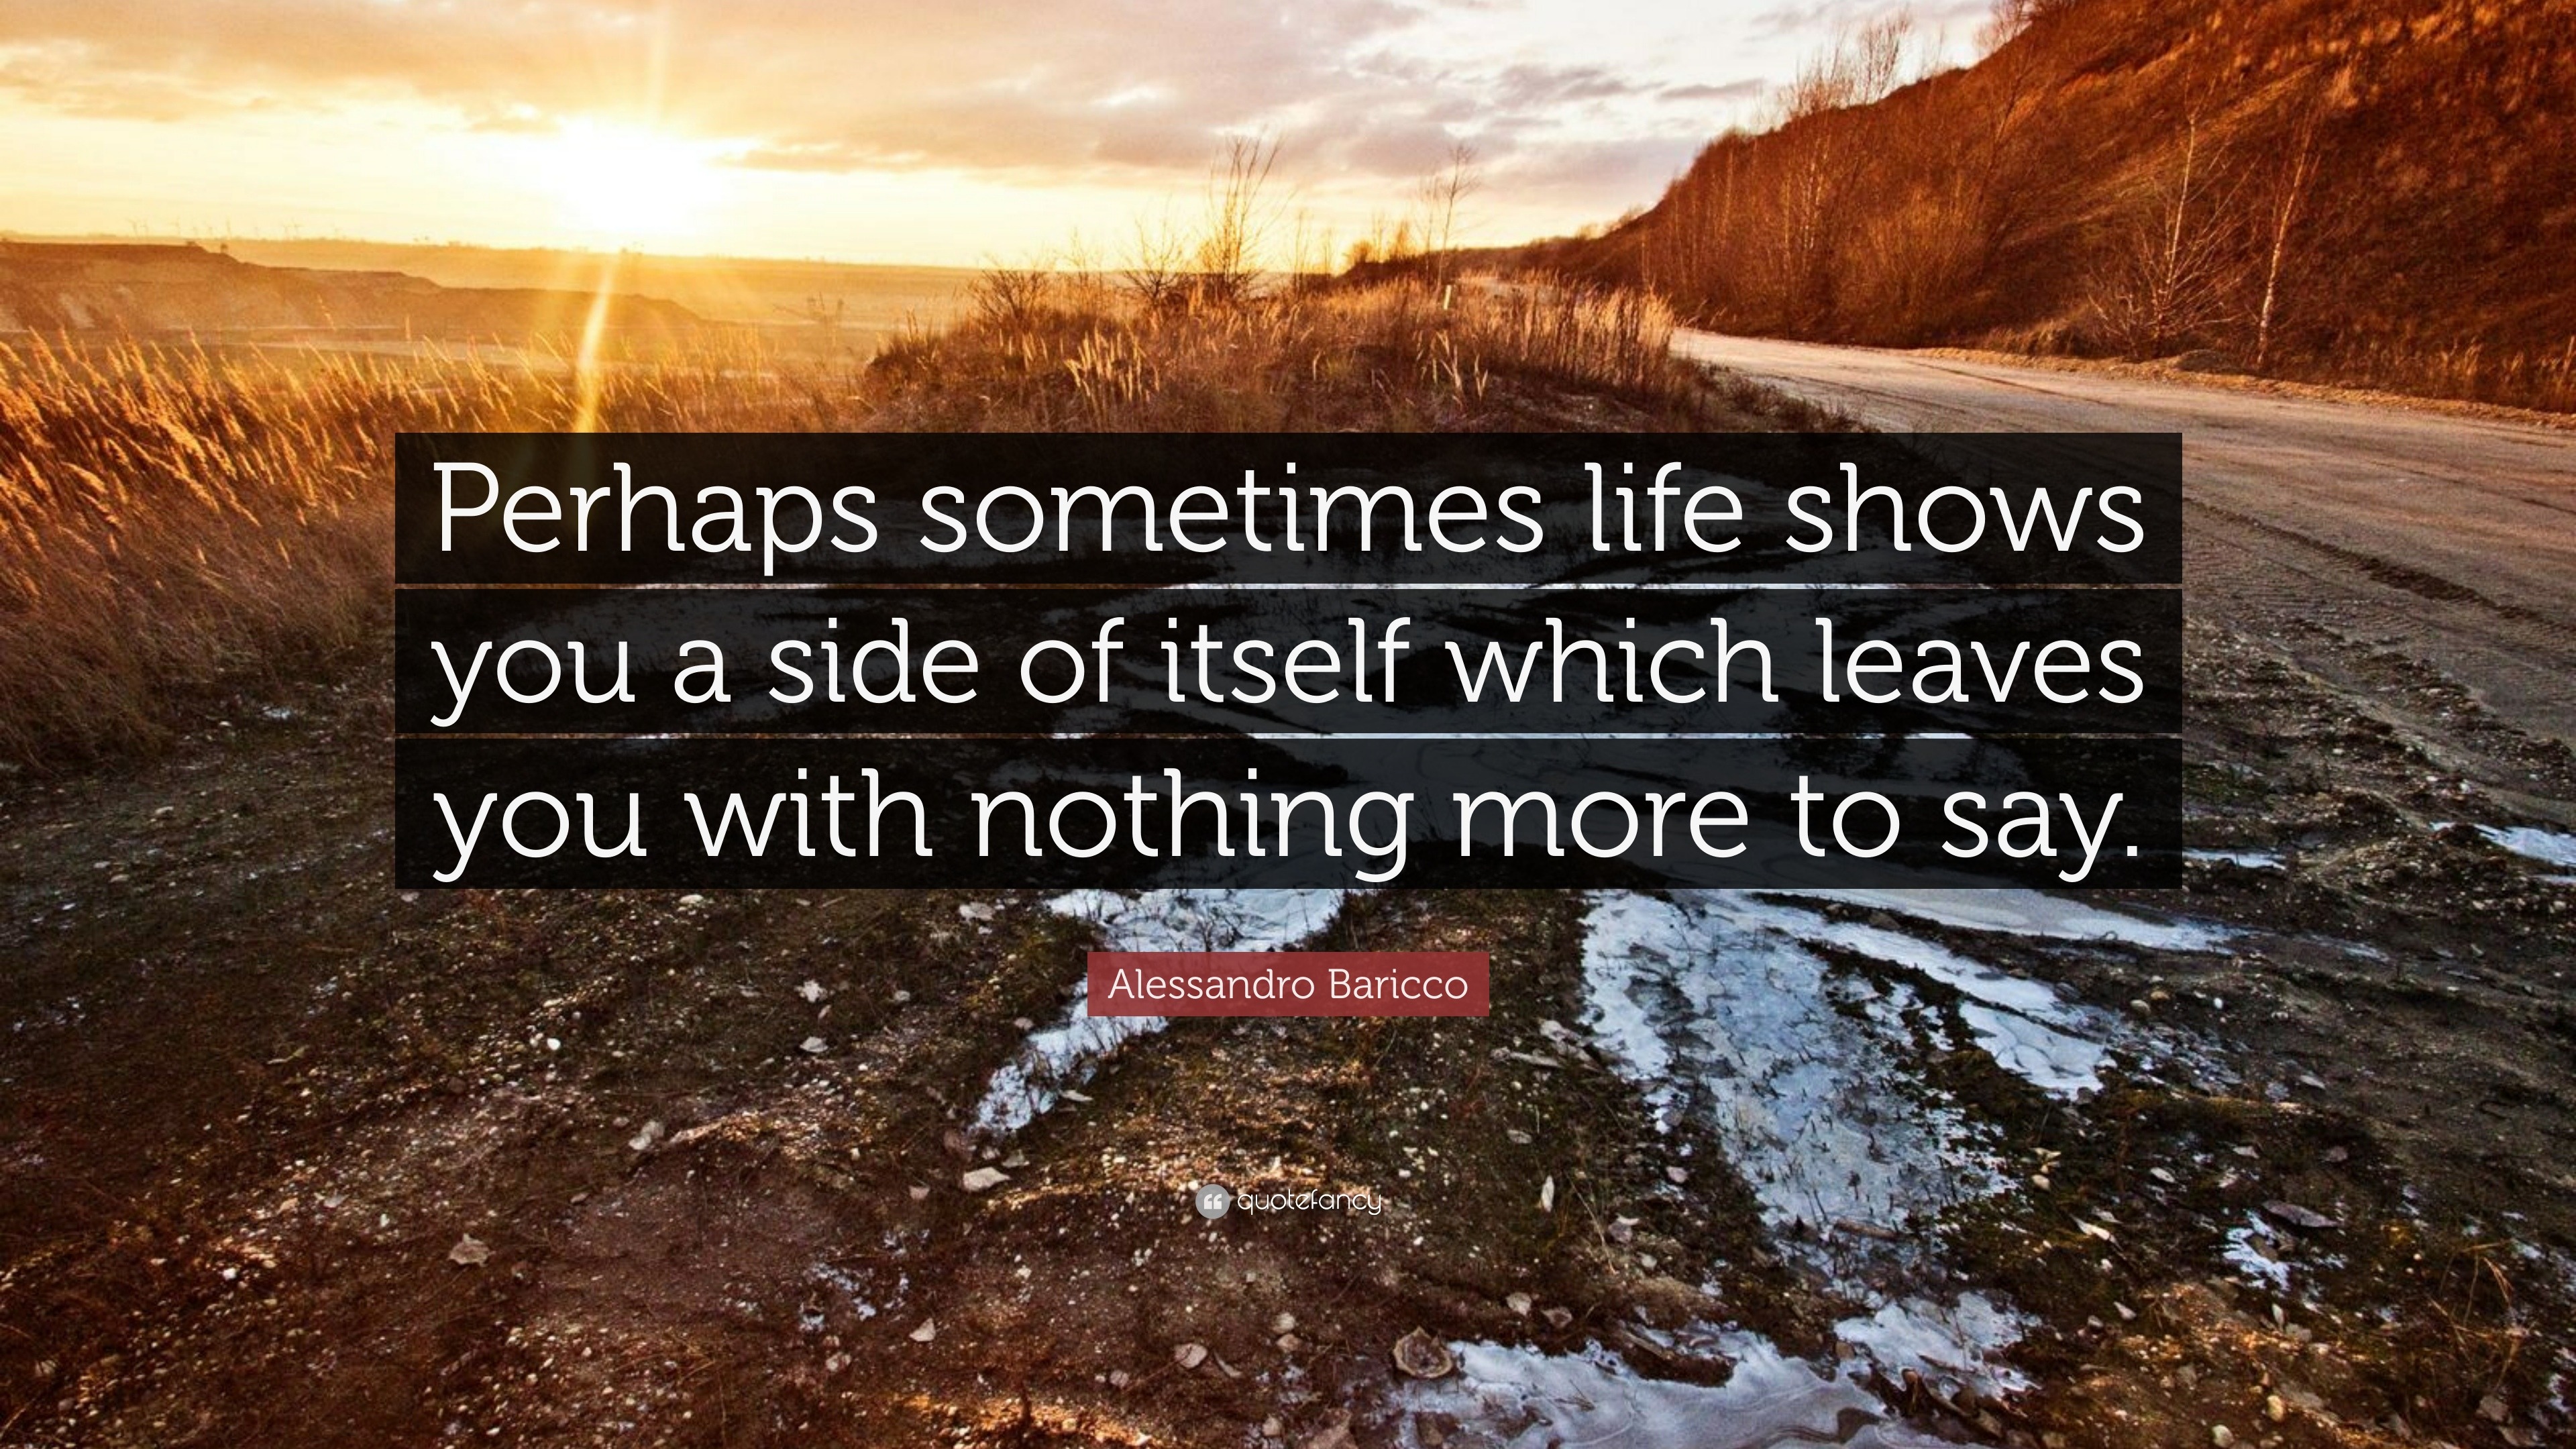 Alessandro Baricco Quote: “Perhaps sometimes life shows you a side of  itself which leaves you with